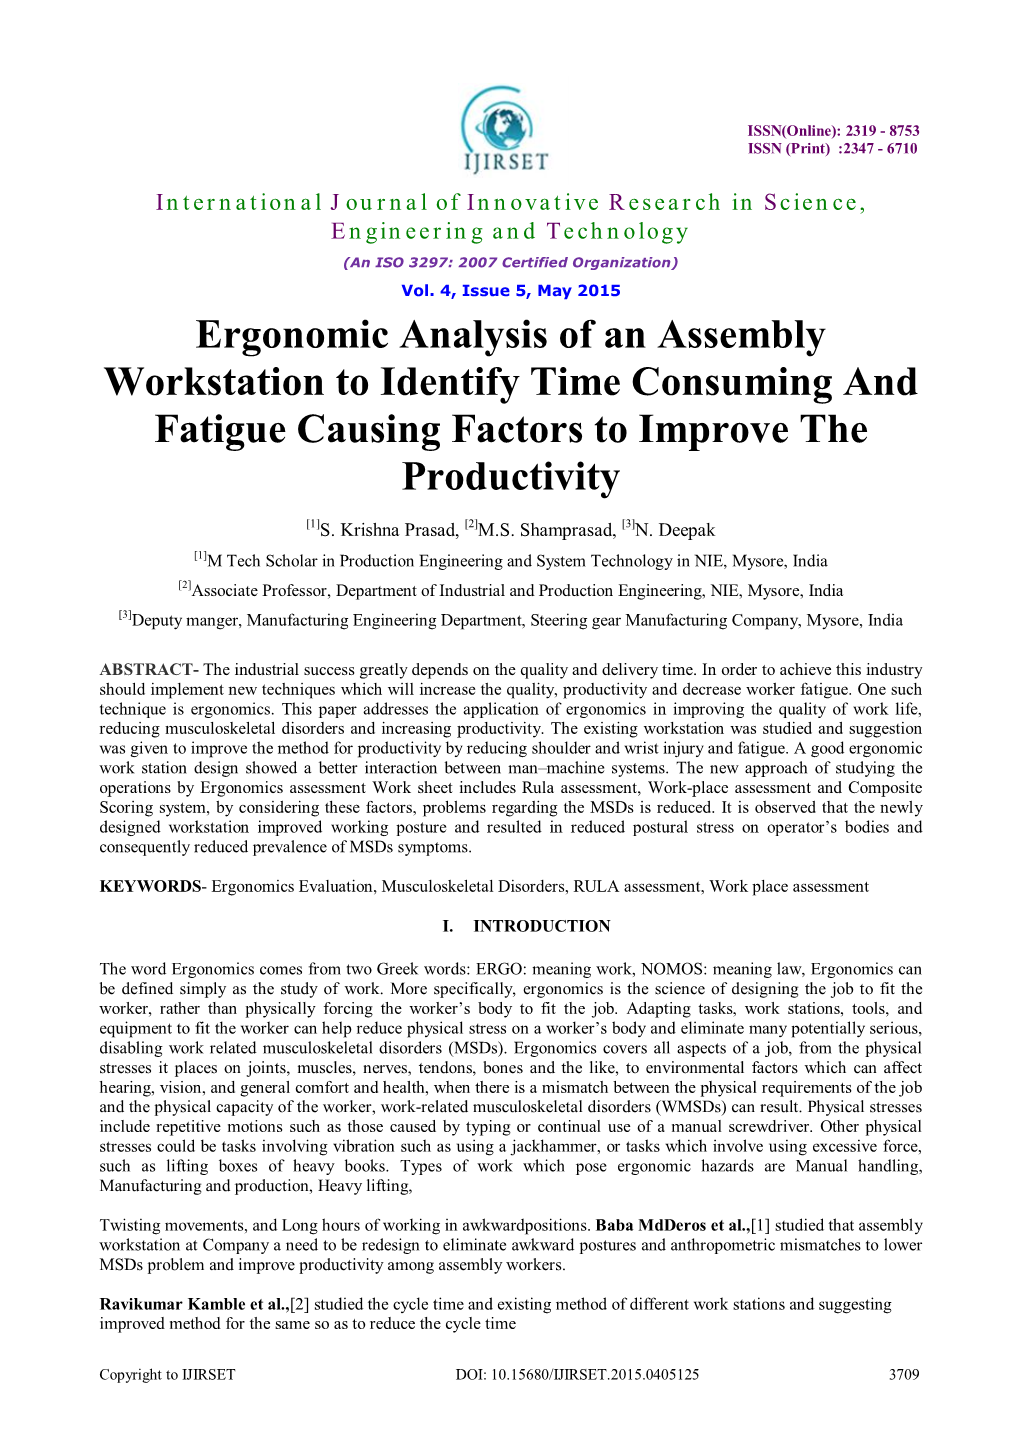 Ergonomic Analysis of an Assembly Workstation to Identify Time Consuming and Fatigue Causing Factors to Improve the Productivity